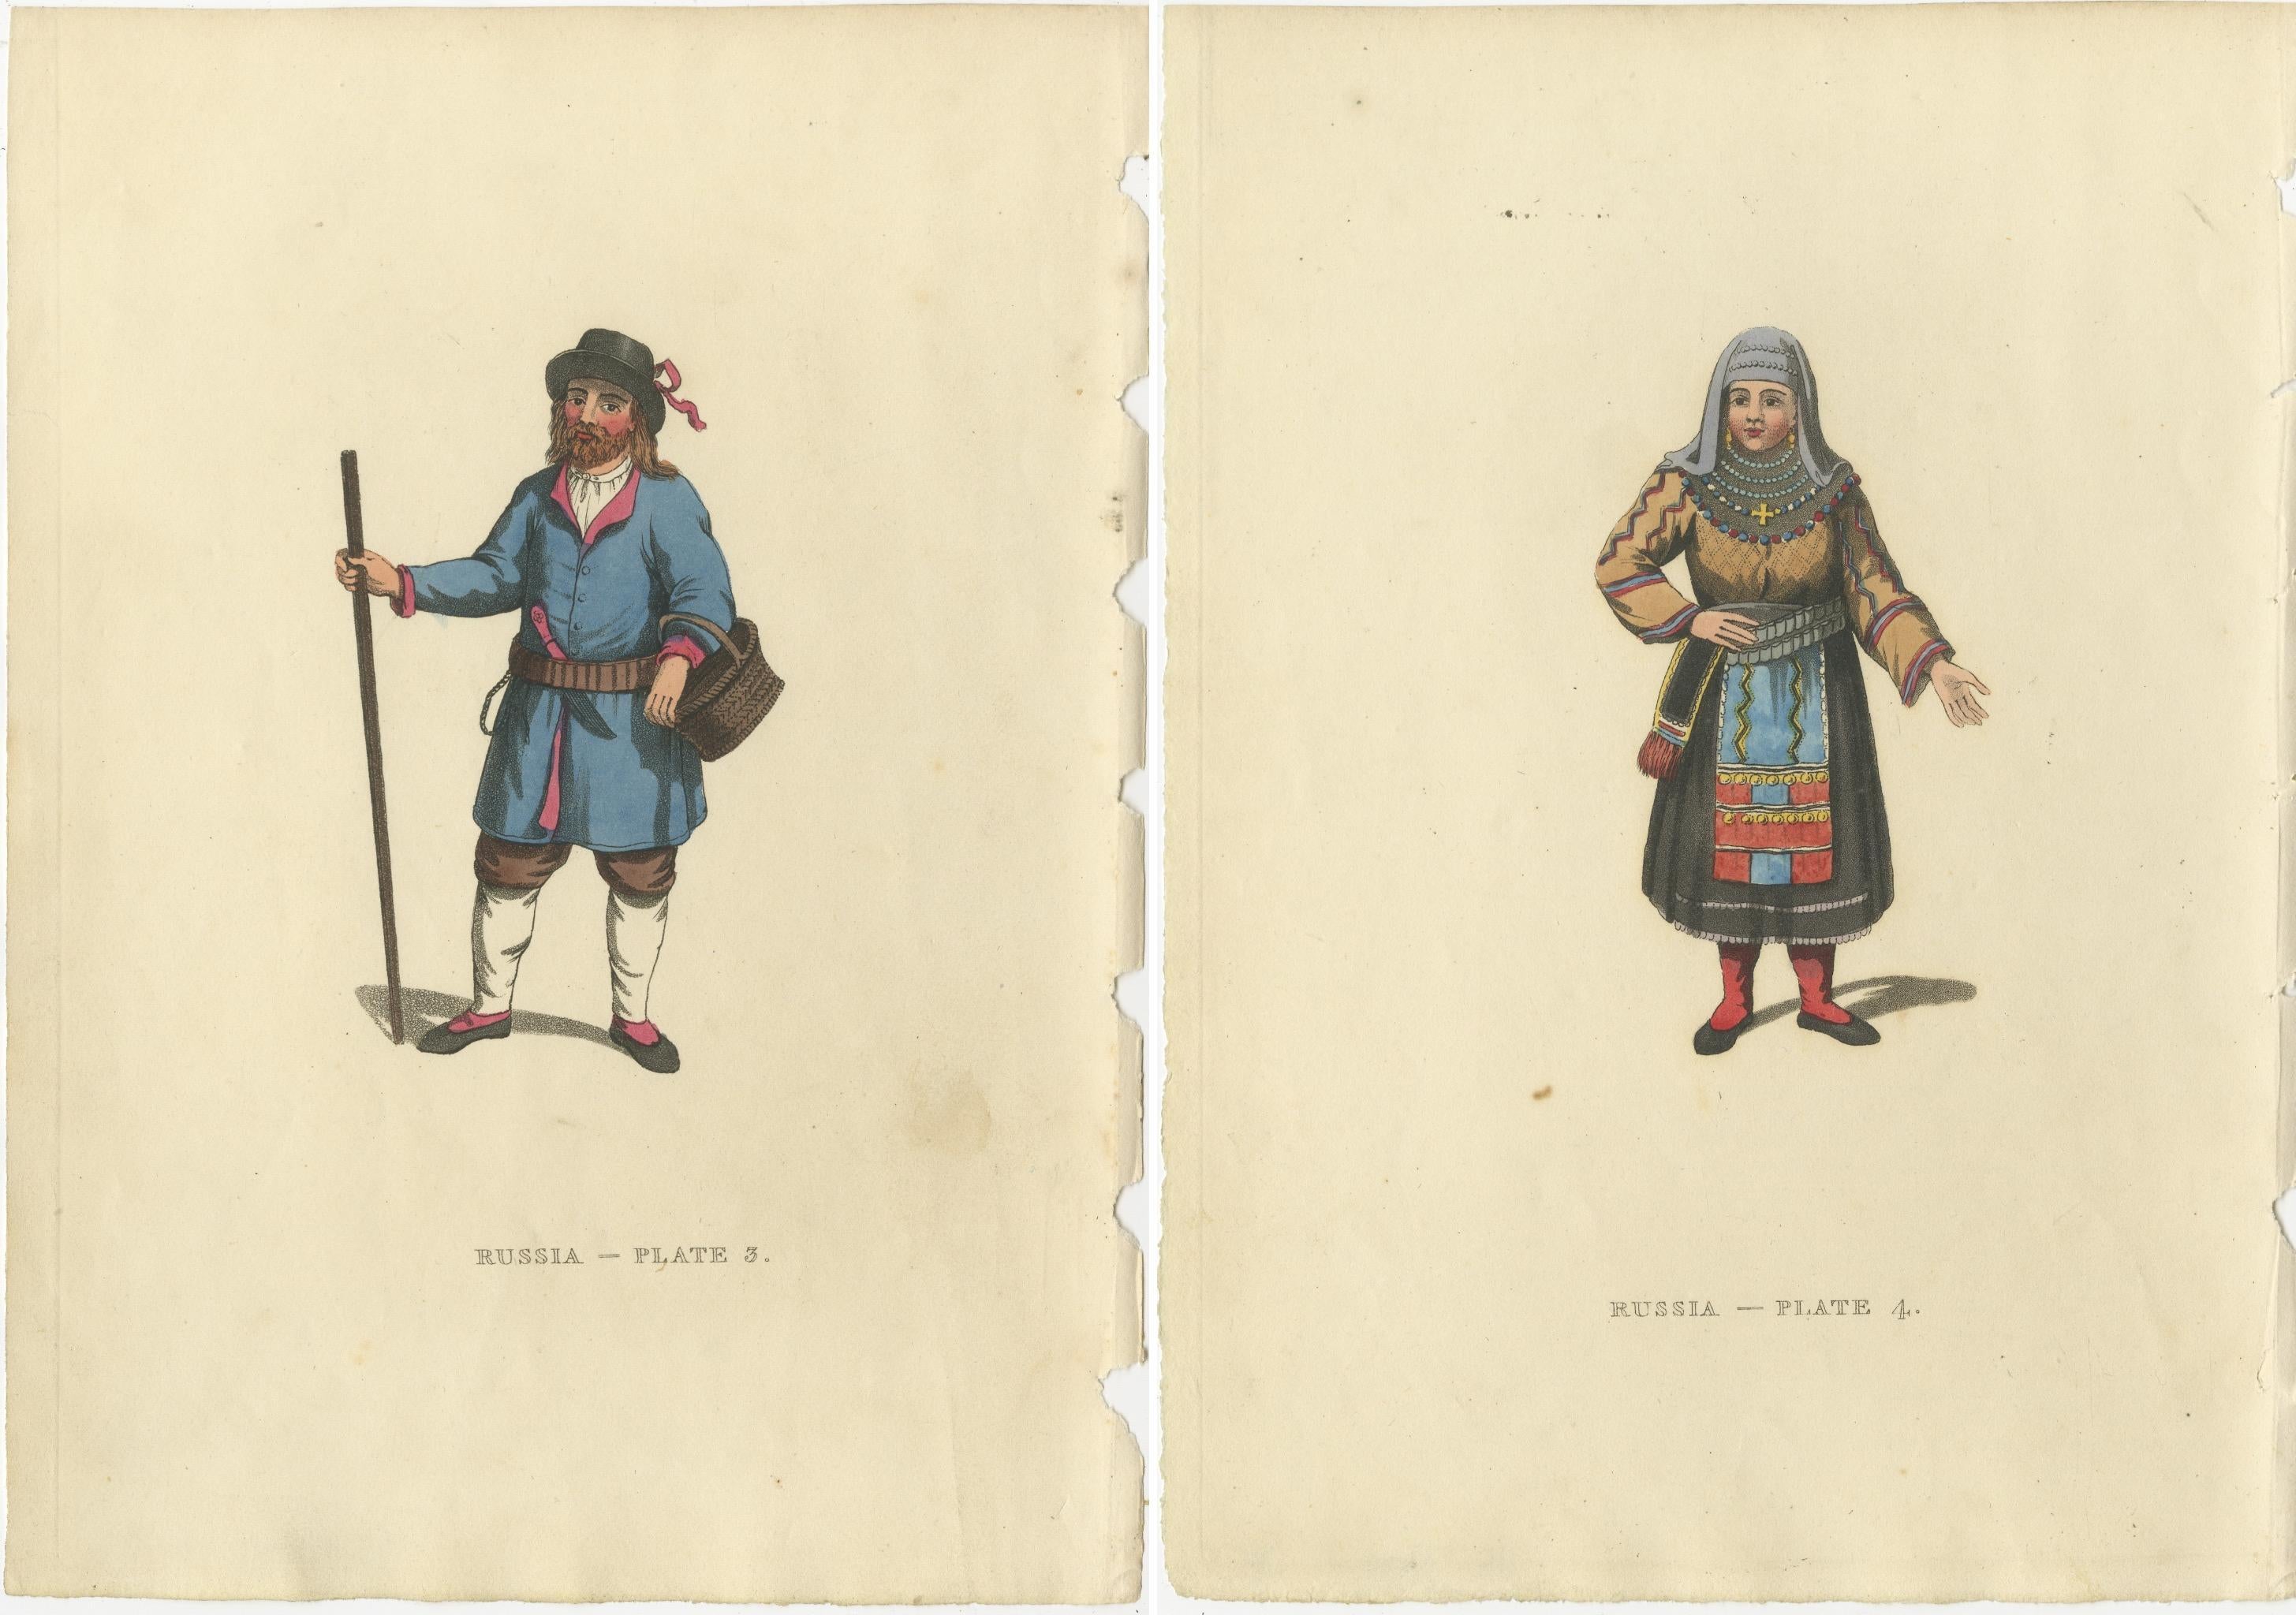 These images are fine examples of the detailed and colorful engravings that appear in William Alexander's 